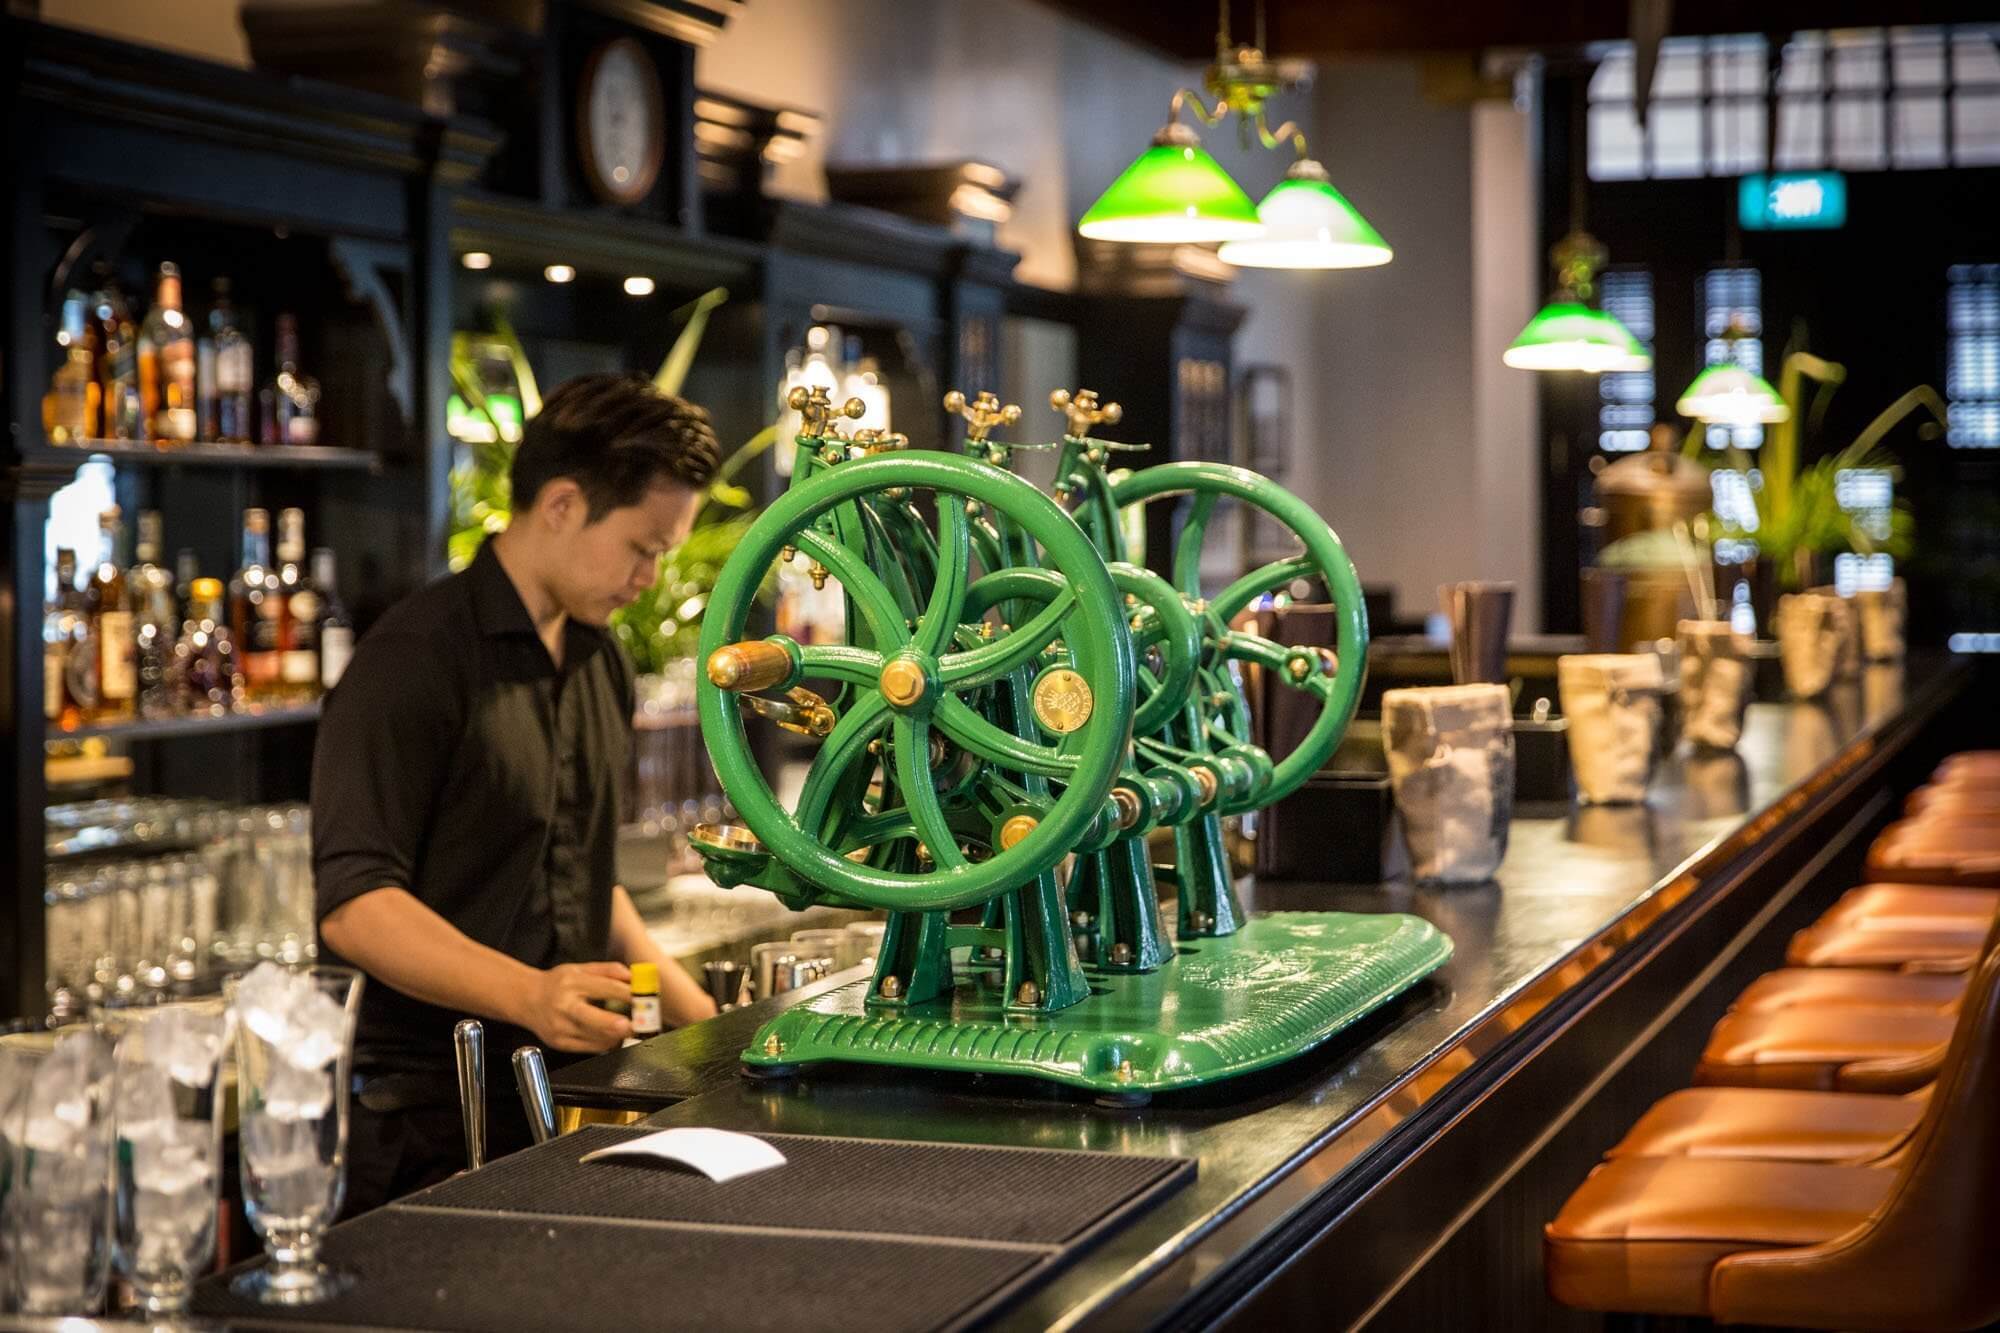 The hand-cranked Singapore Sling shaking machine at Long Bar in Raffles Hotel in Singapore